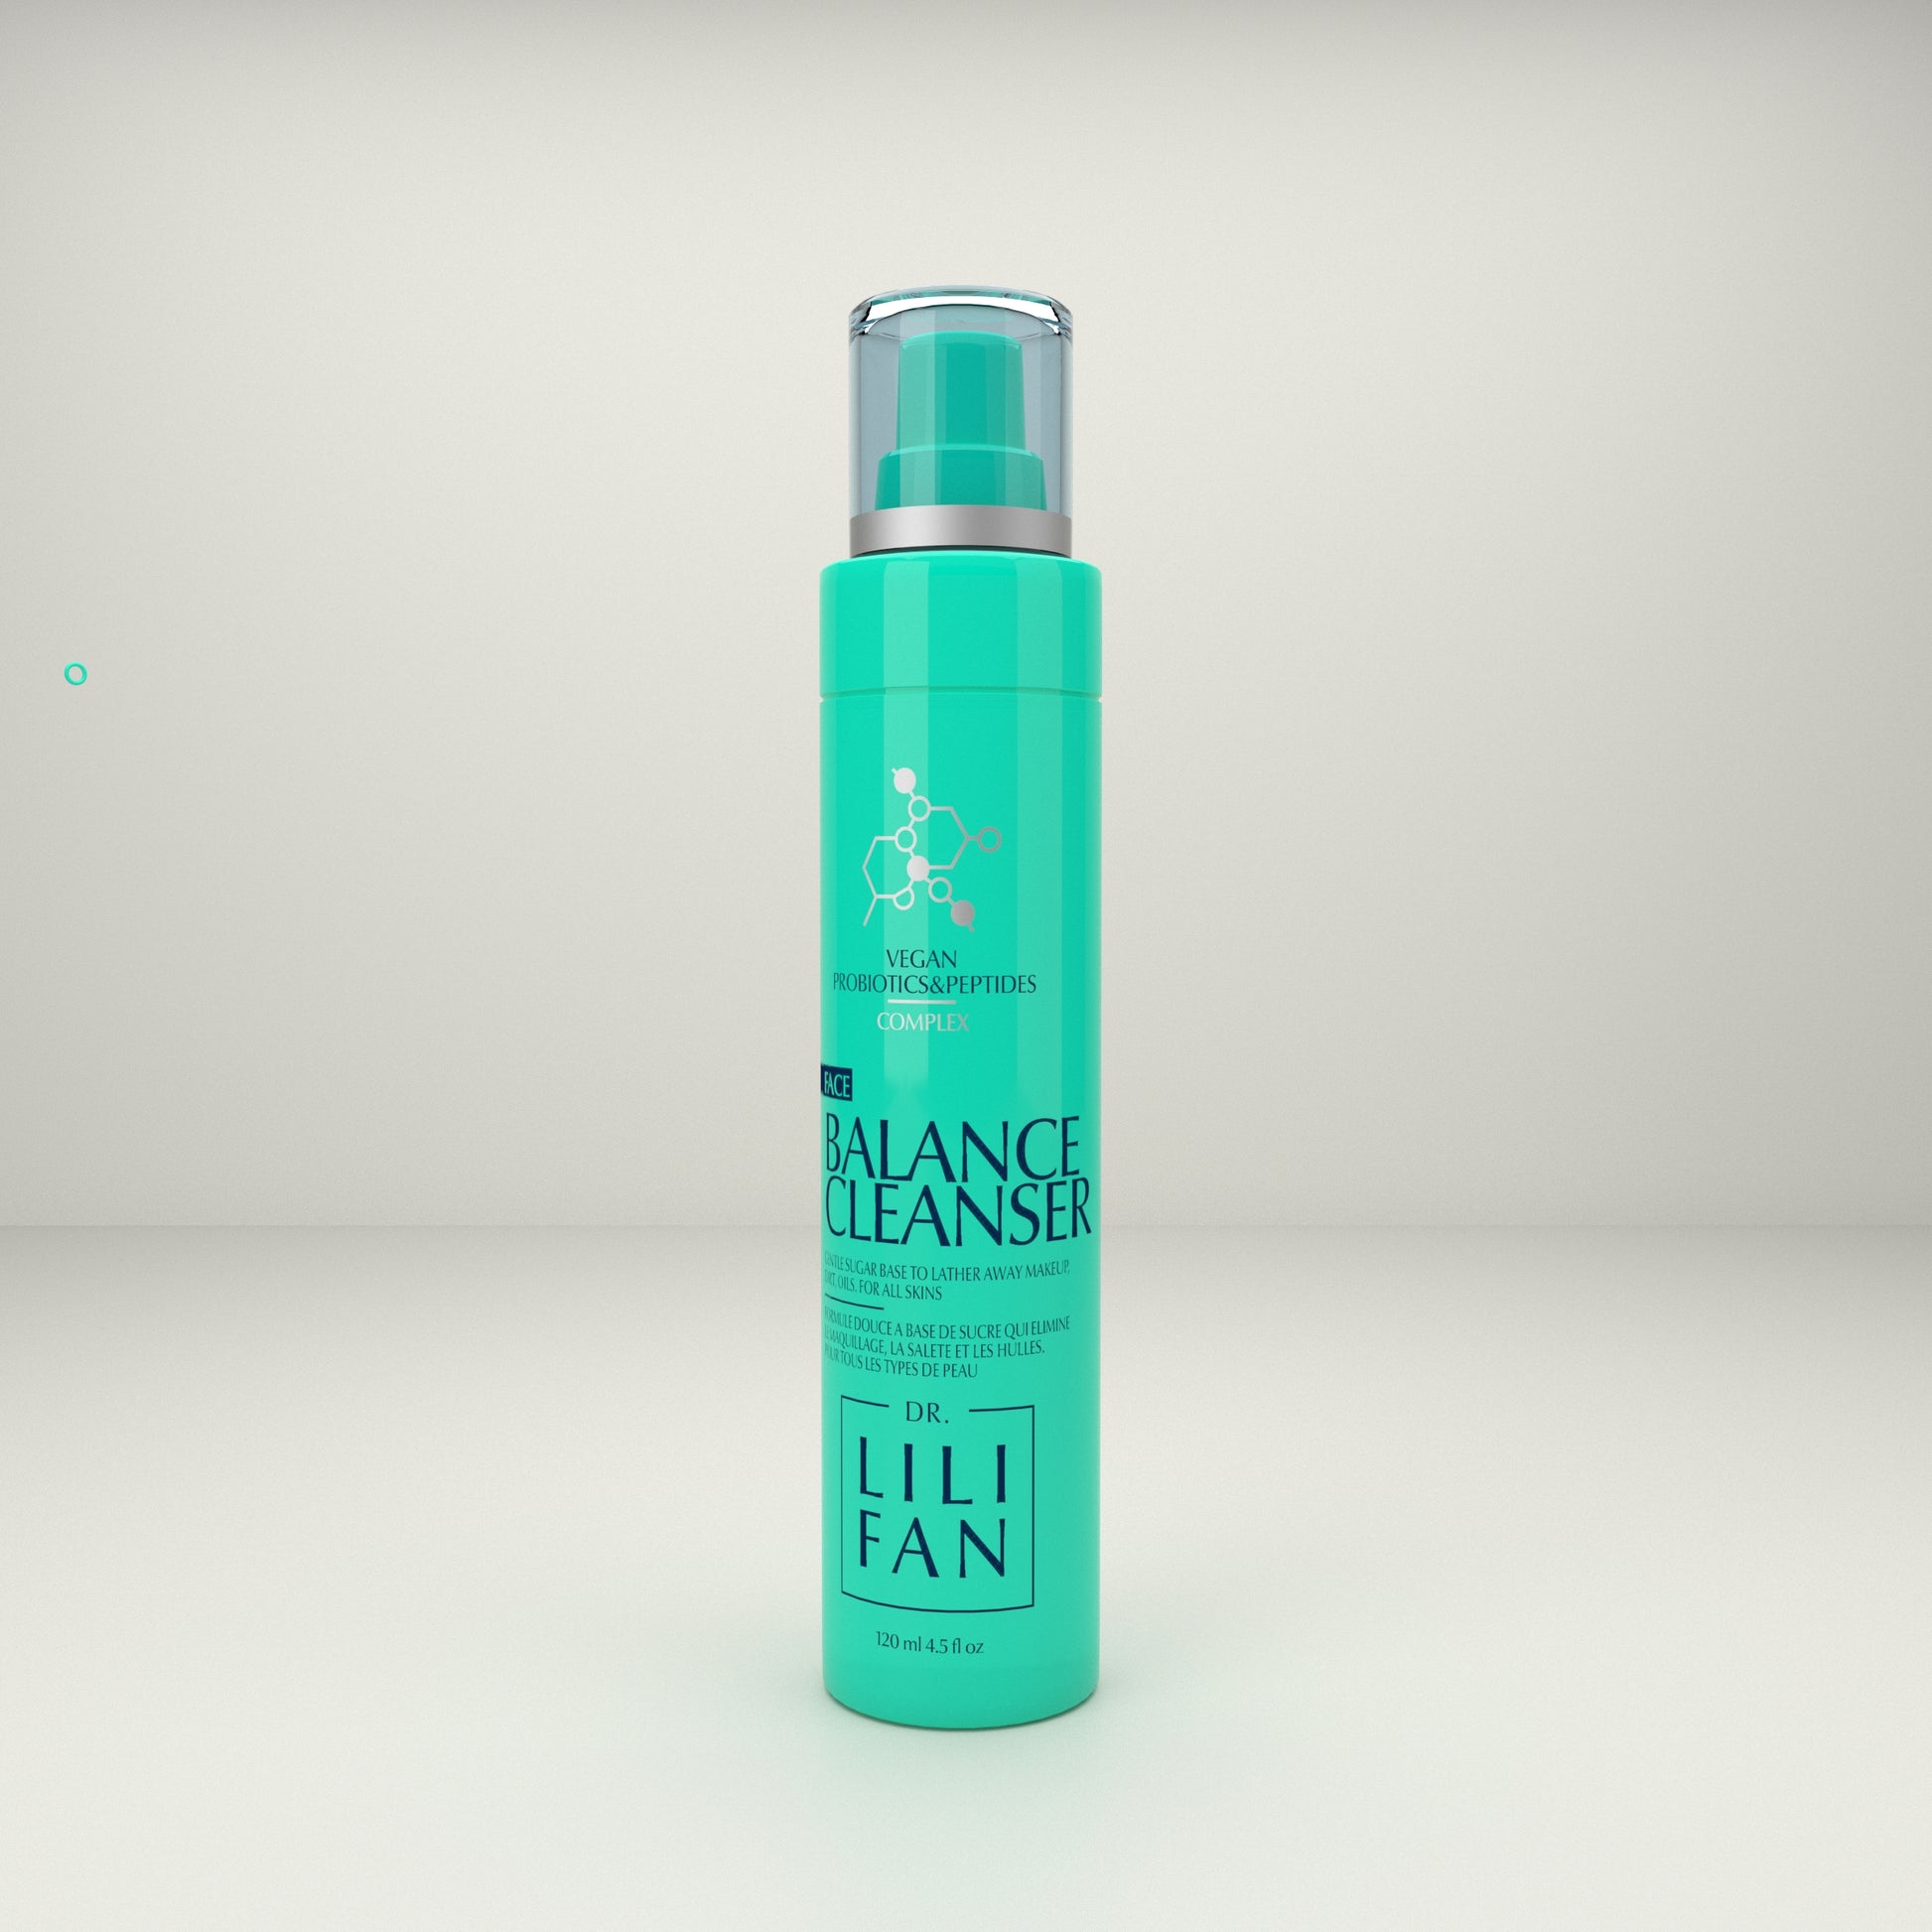 A bottle of cleanser on a tan background